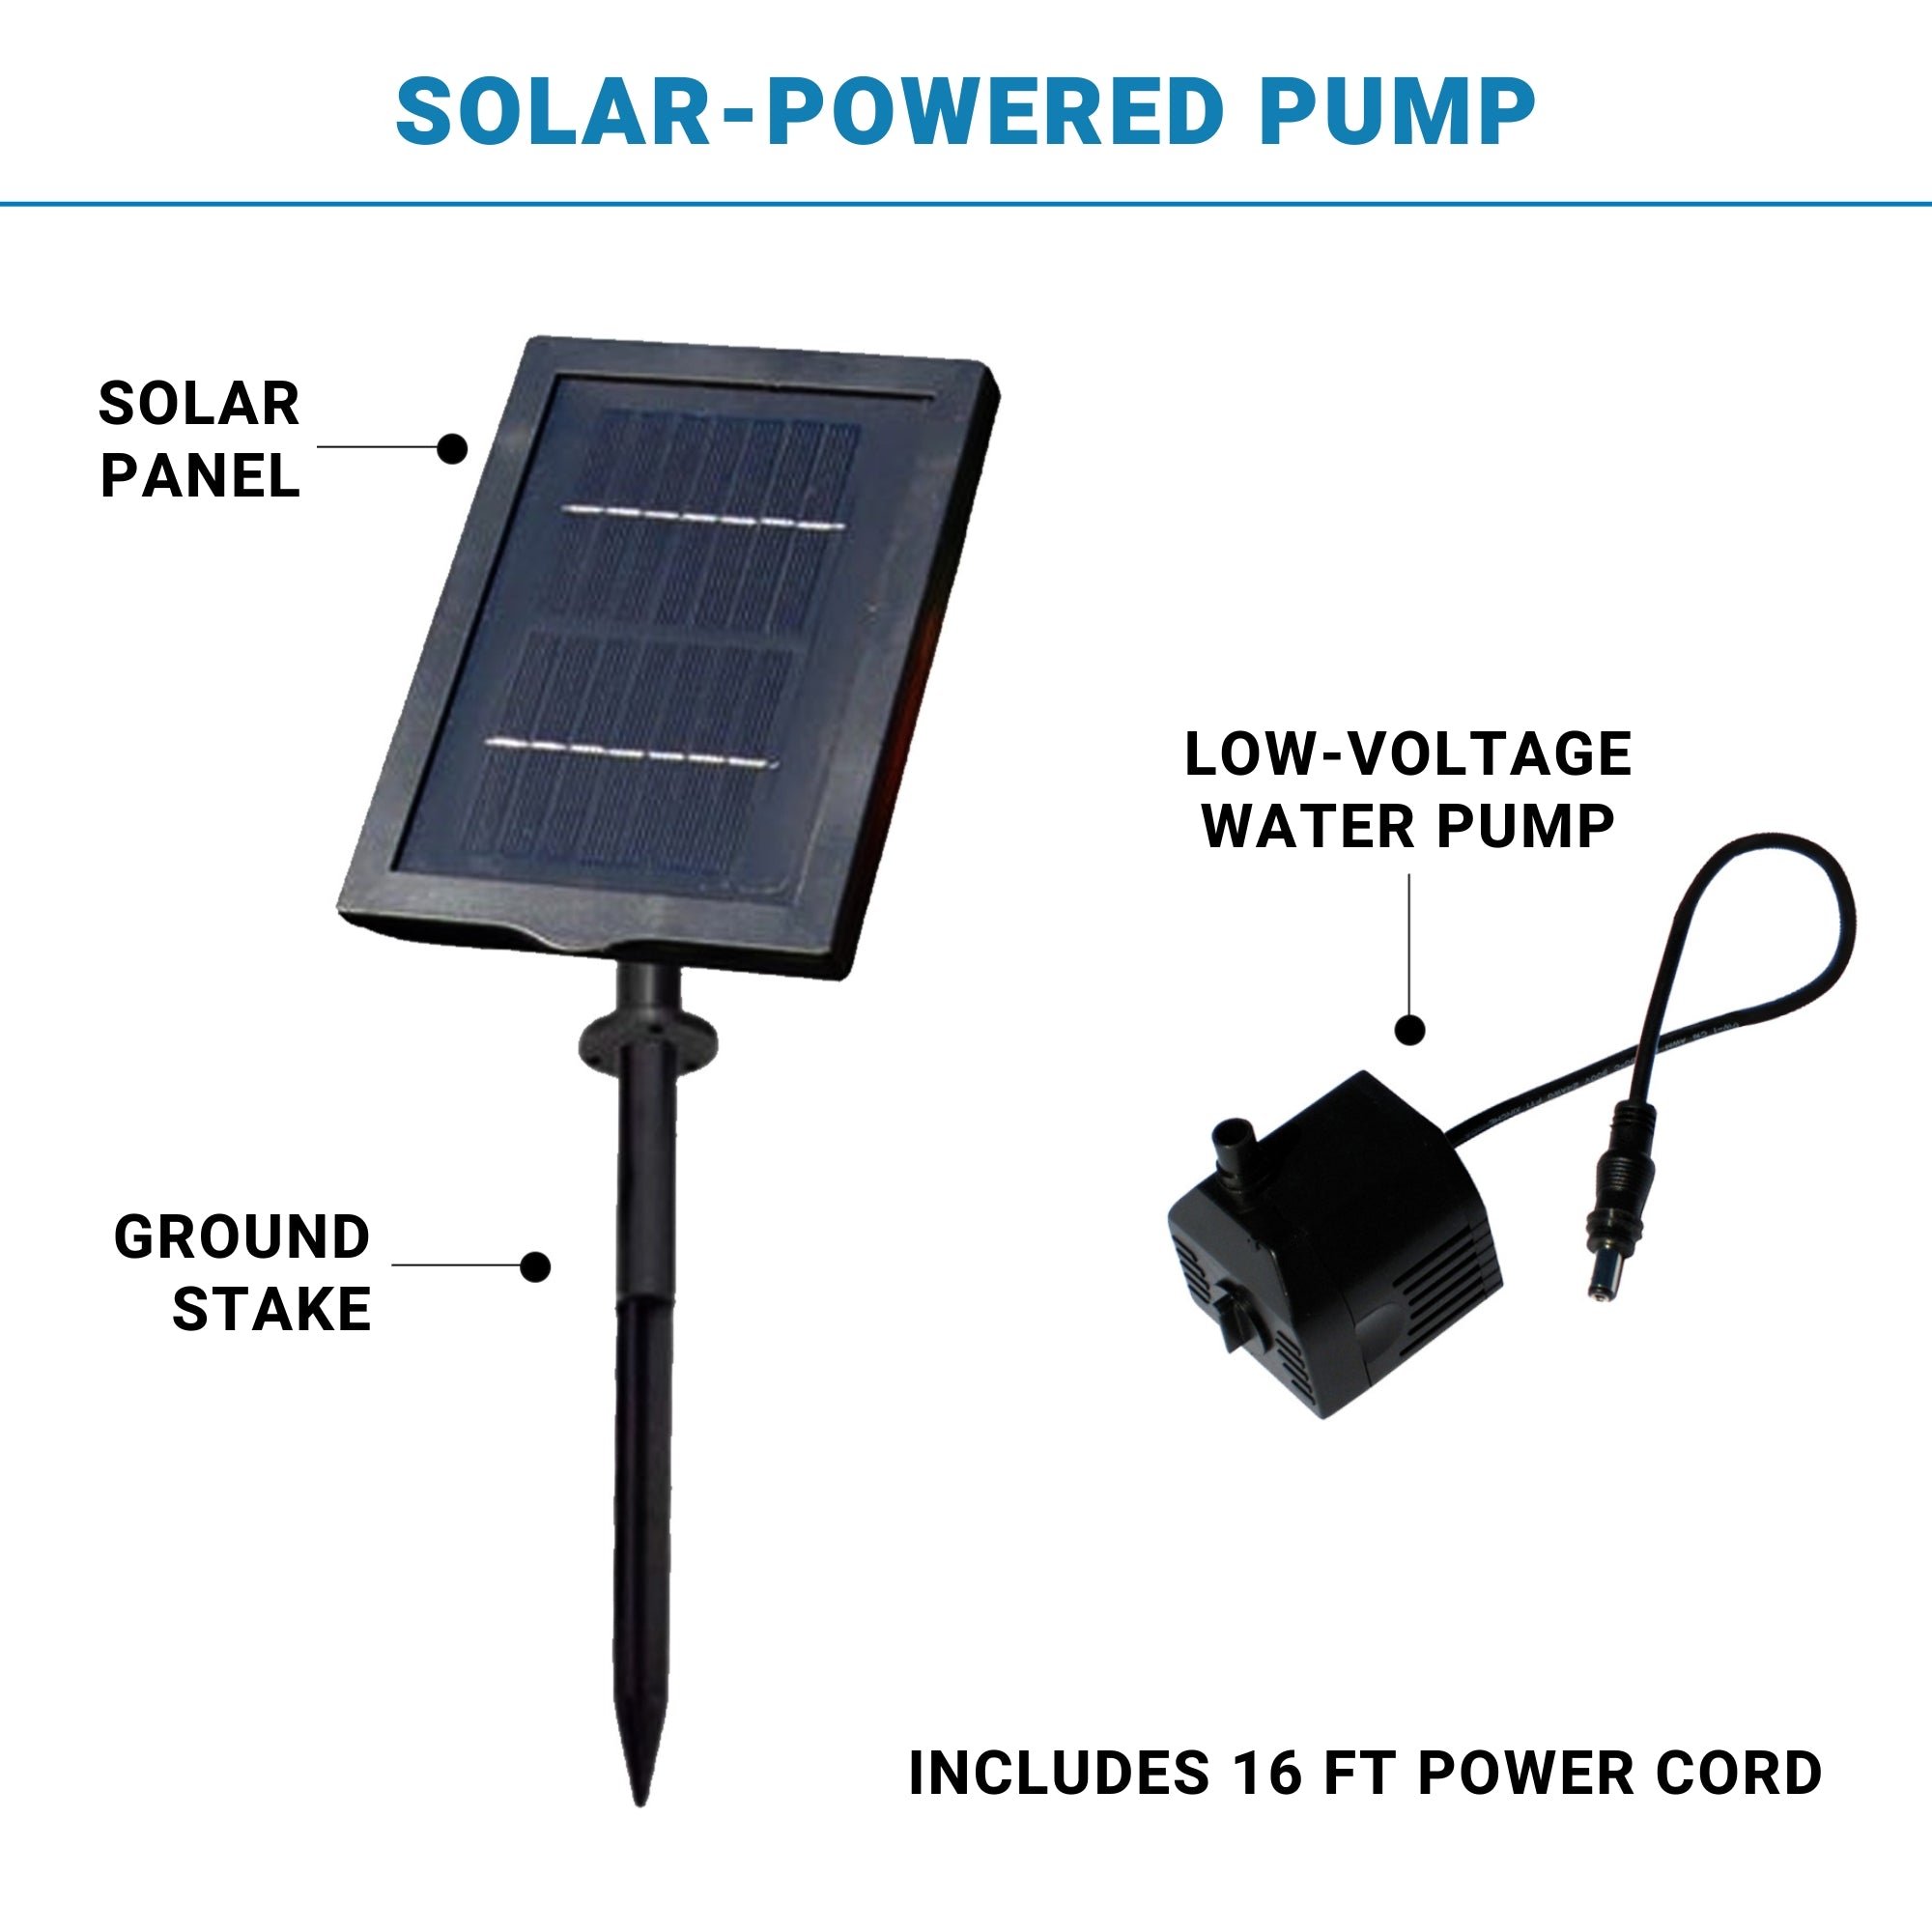 Pictures of the solar panel with ground stake, assembled, and the fountain pump, on a white background, with parts labeled: Solar panel; ground stake; low-voltage water pump. Text above reads, "Solar-powered pump," and text below reads, "Includes 6 ft power cord."